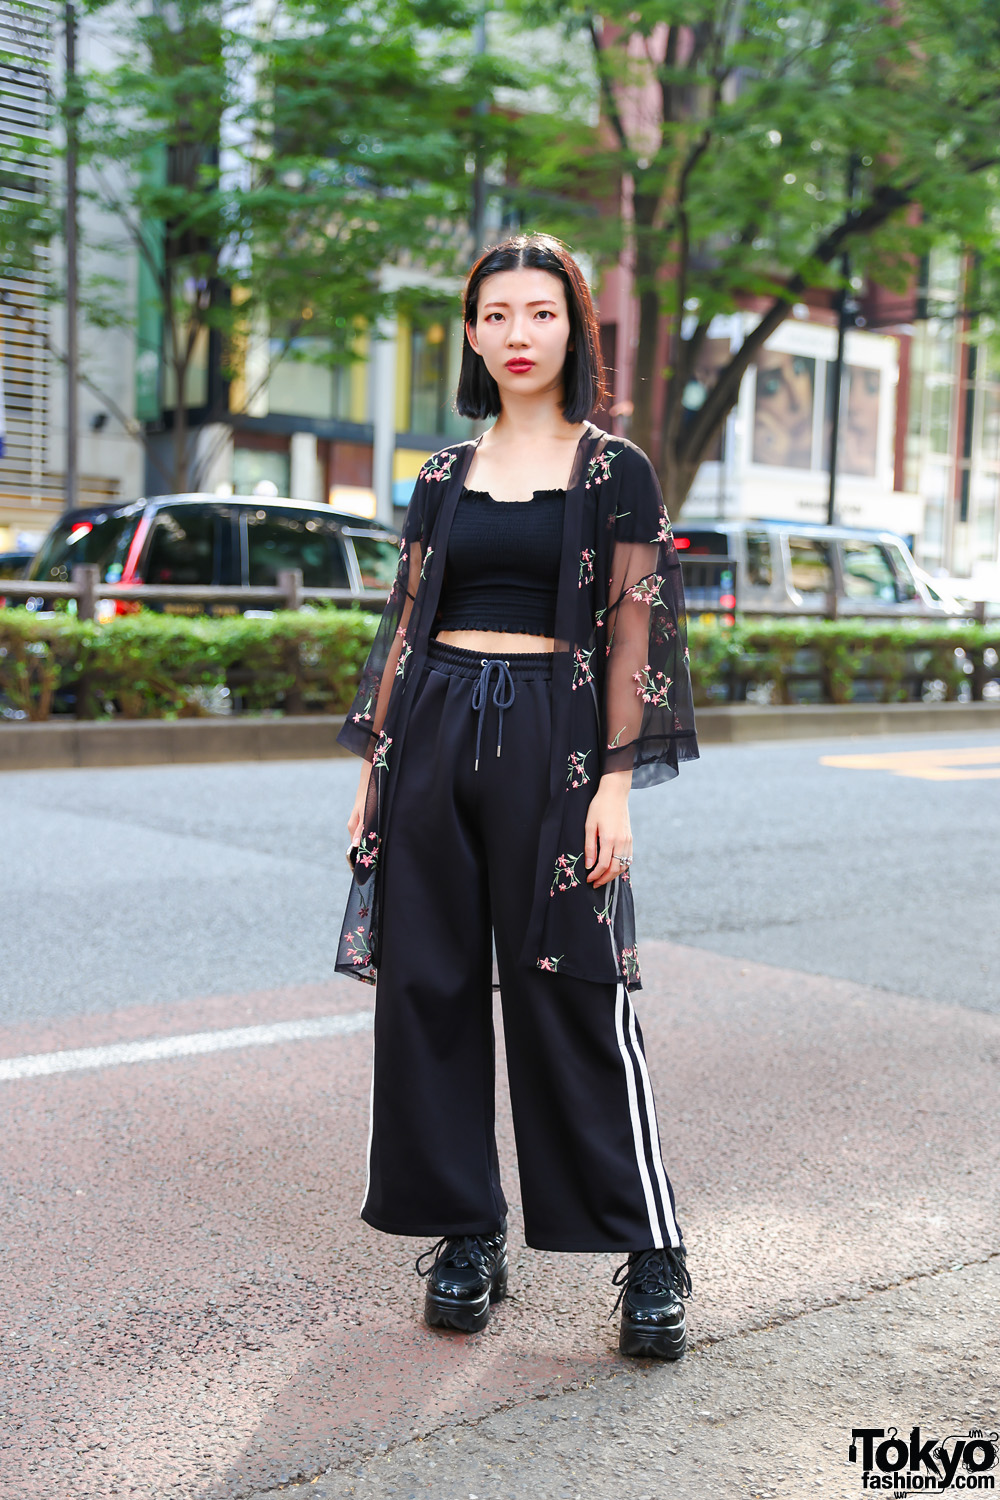 All Black Fashion w/ Crop Top, Sheer Cover-Up, Wide Leg Track Pants & Lace-Up Platform Shoes